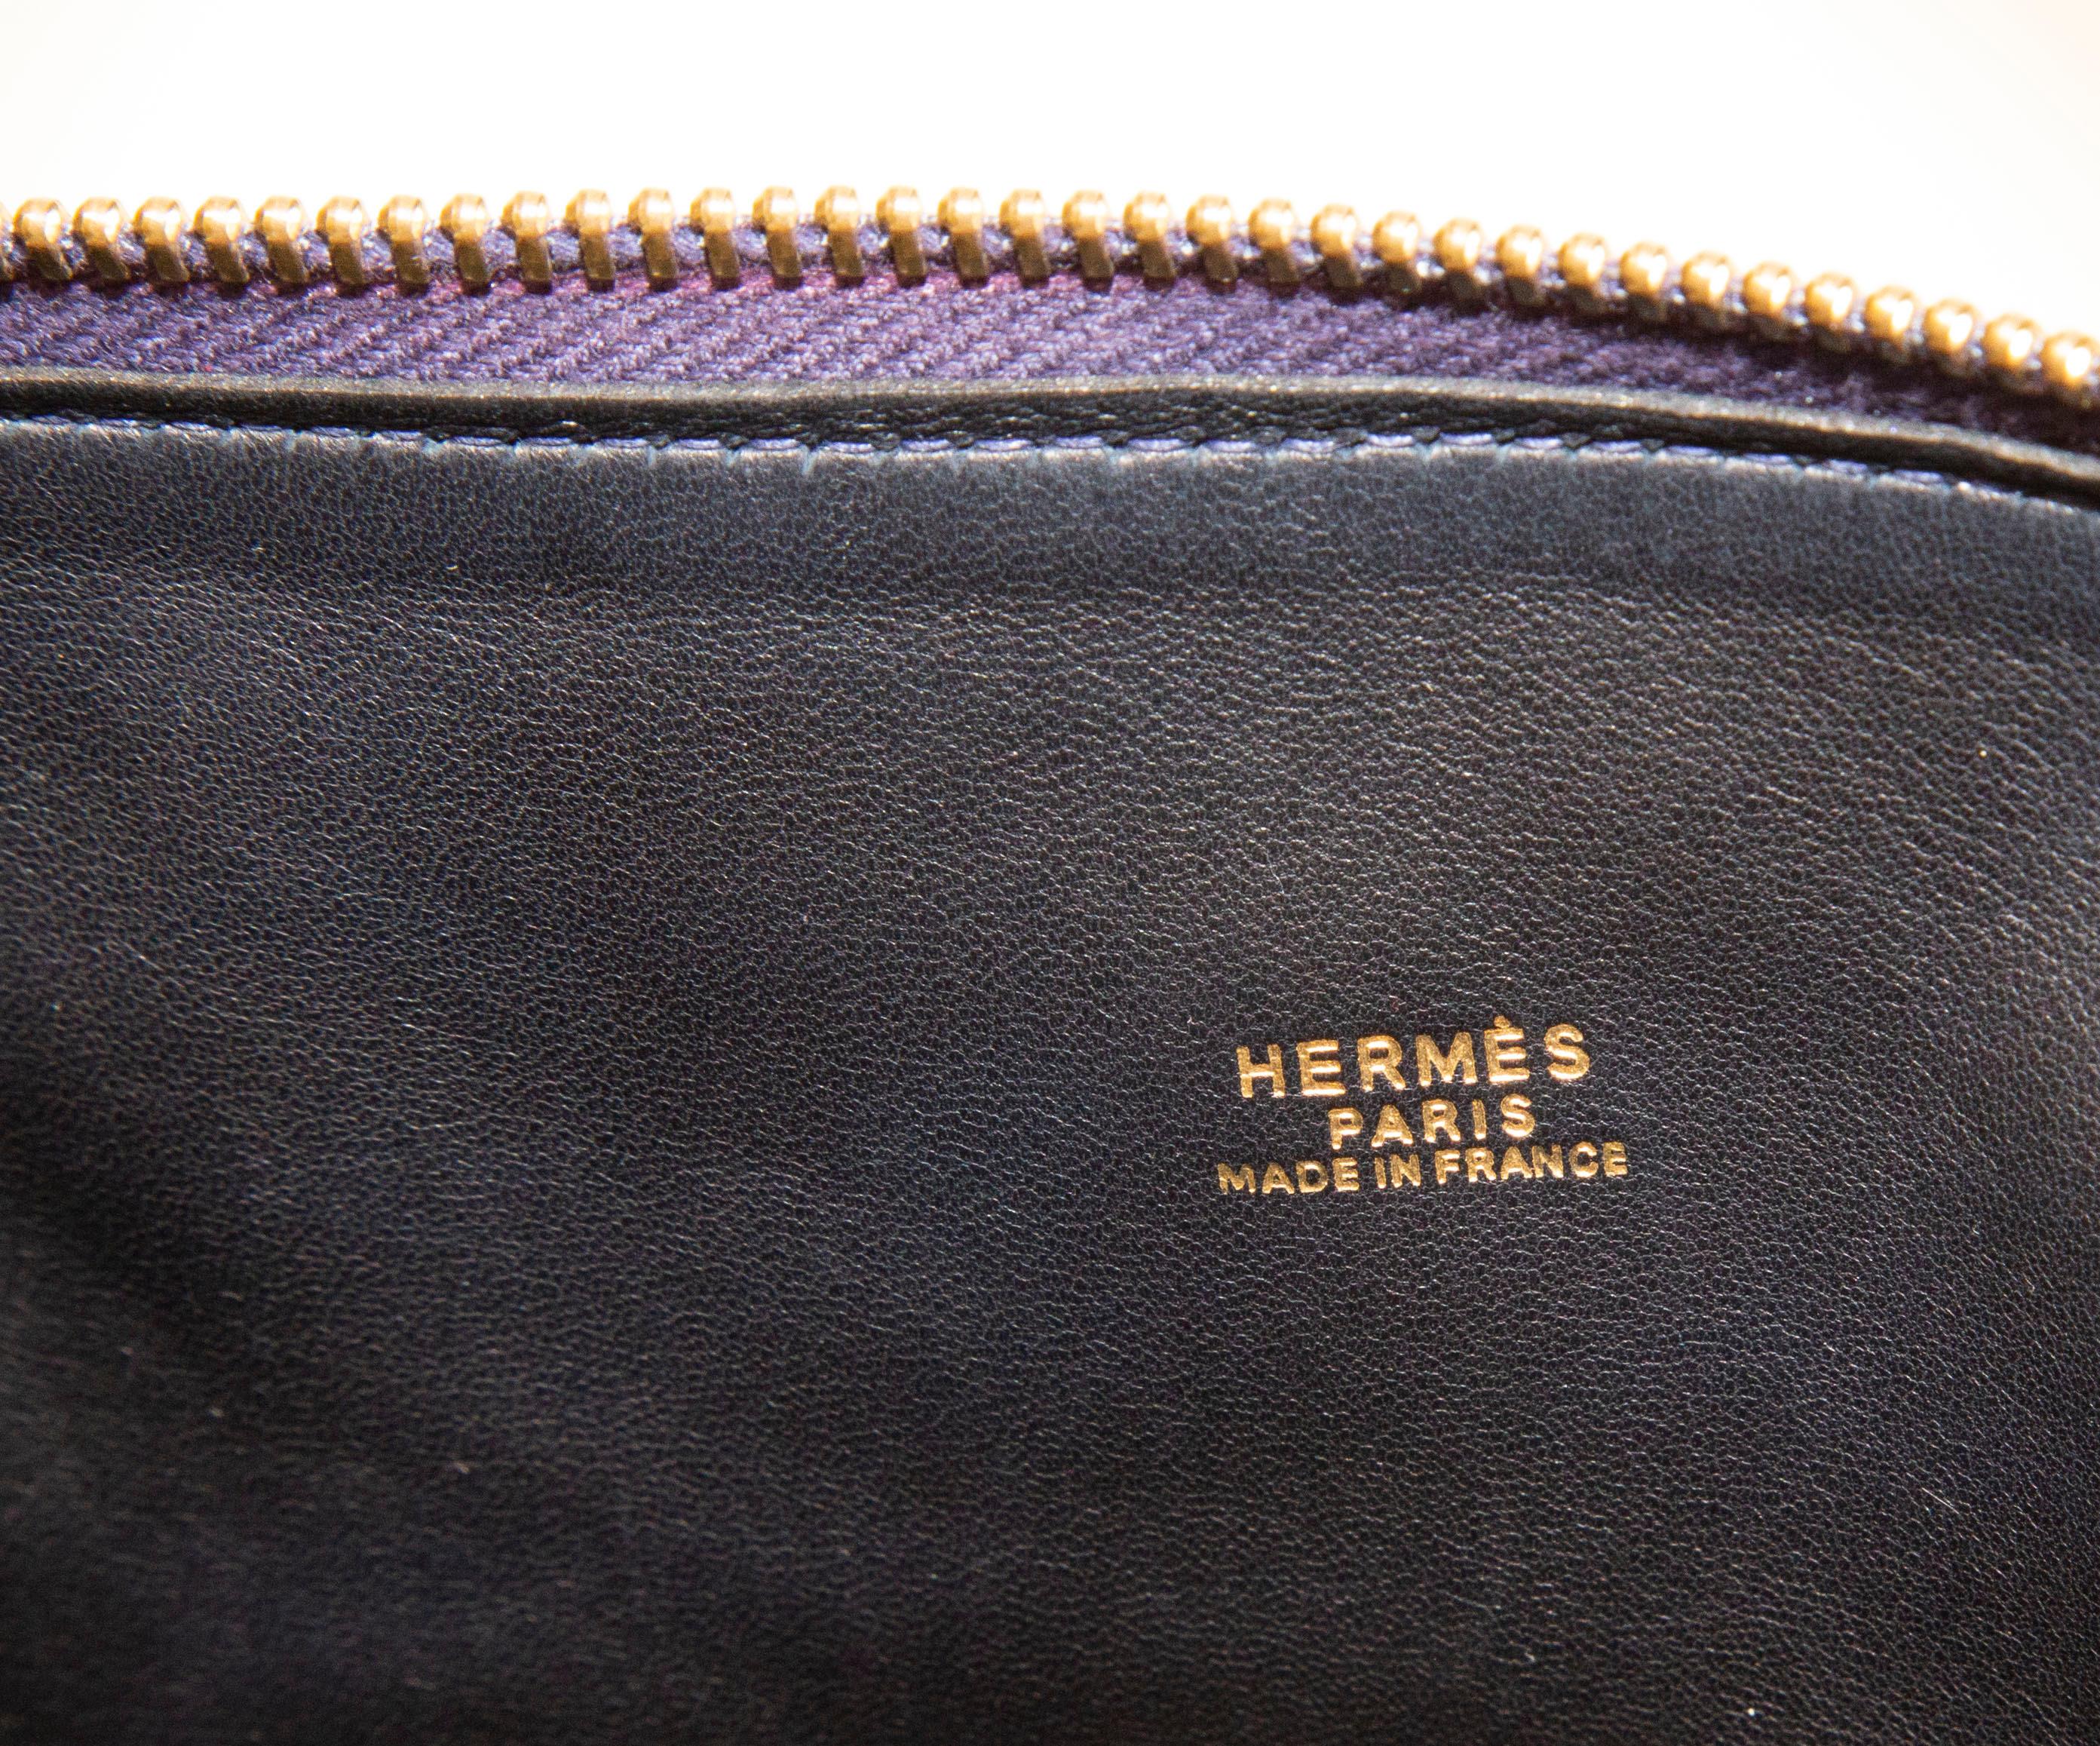 1990s Hermes Bolide 35 Bag in Navy Blue and Red Leather For Sale 8